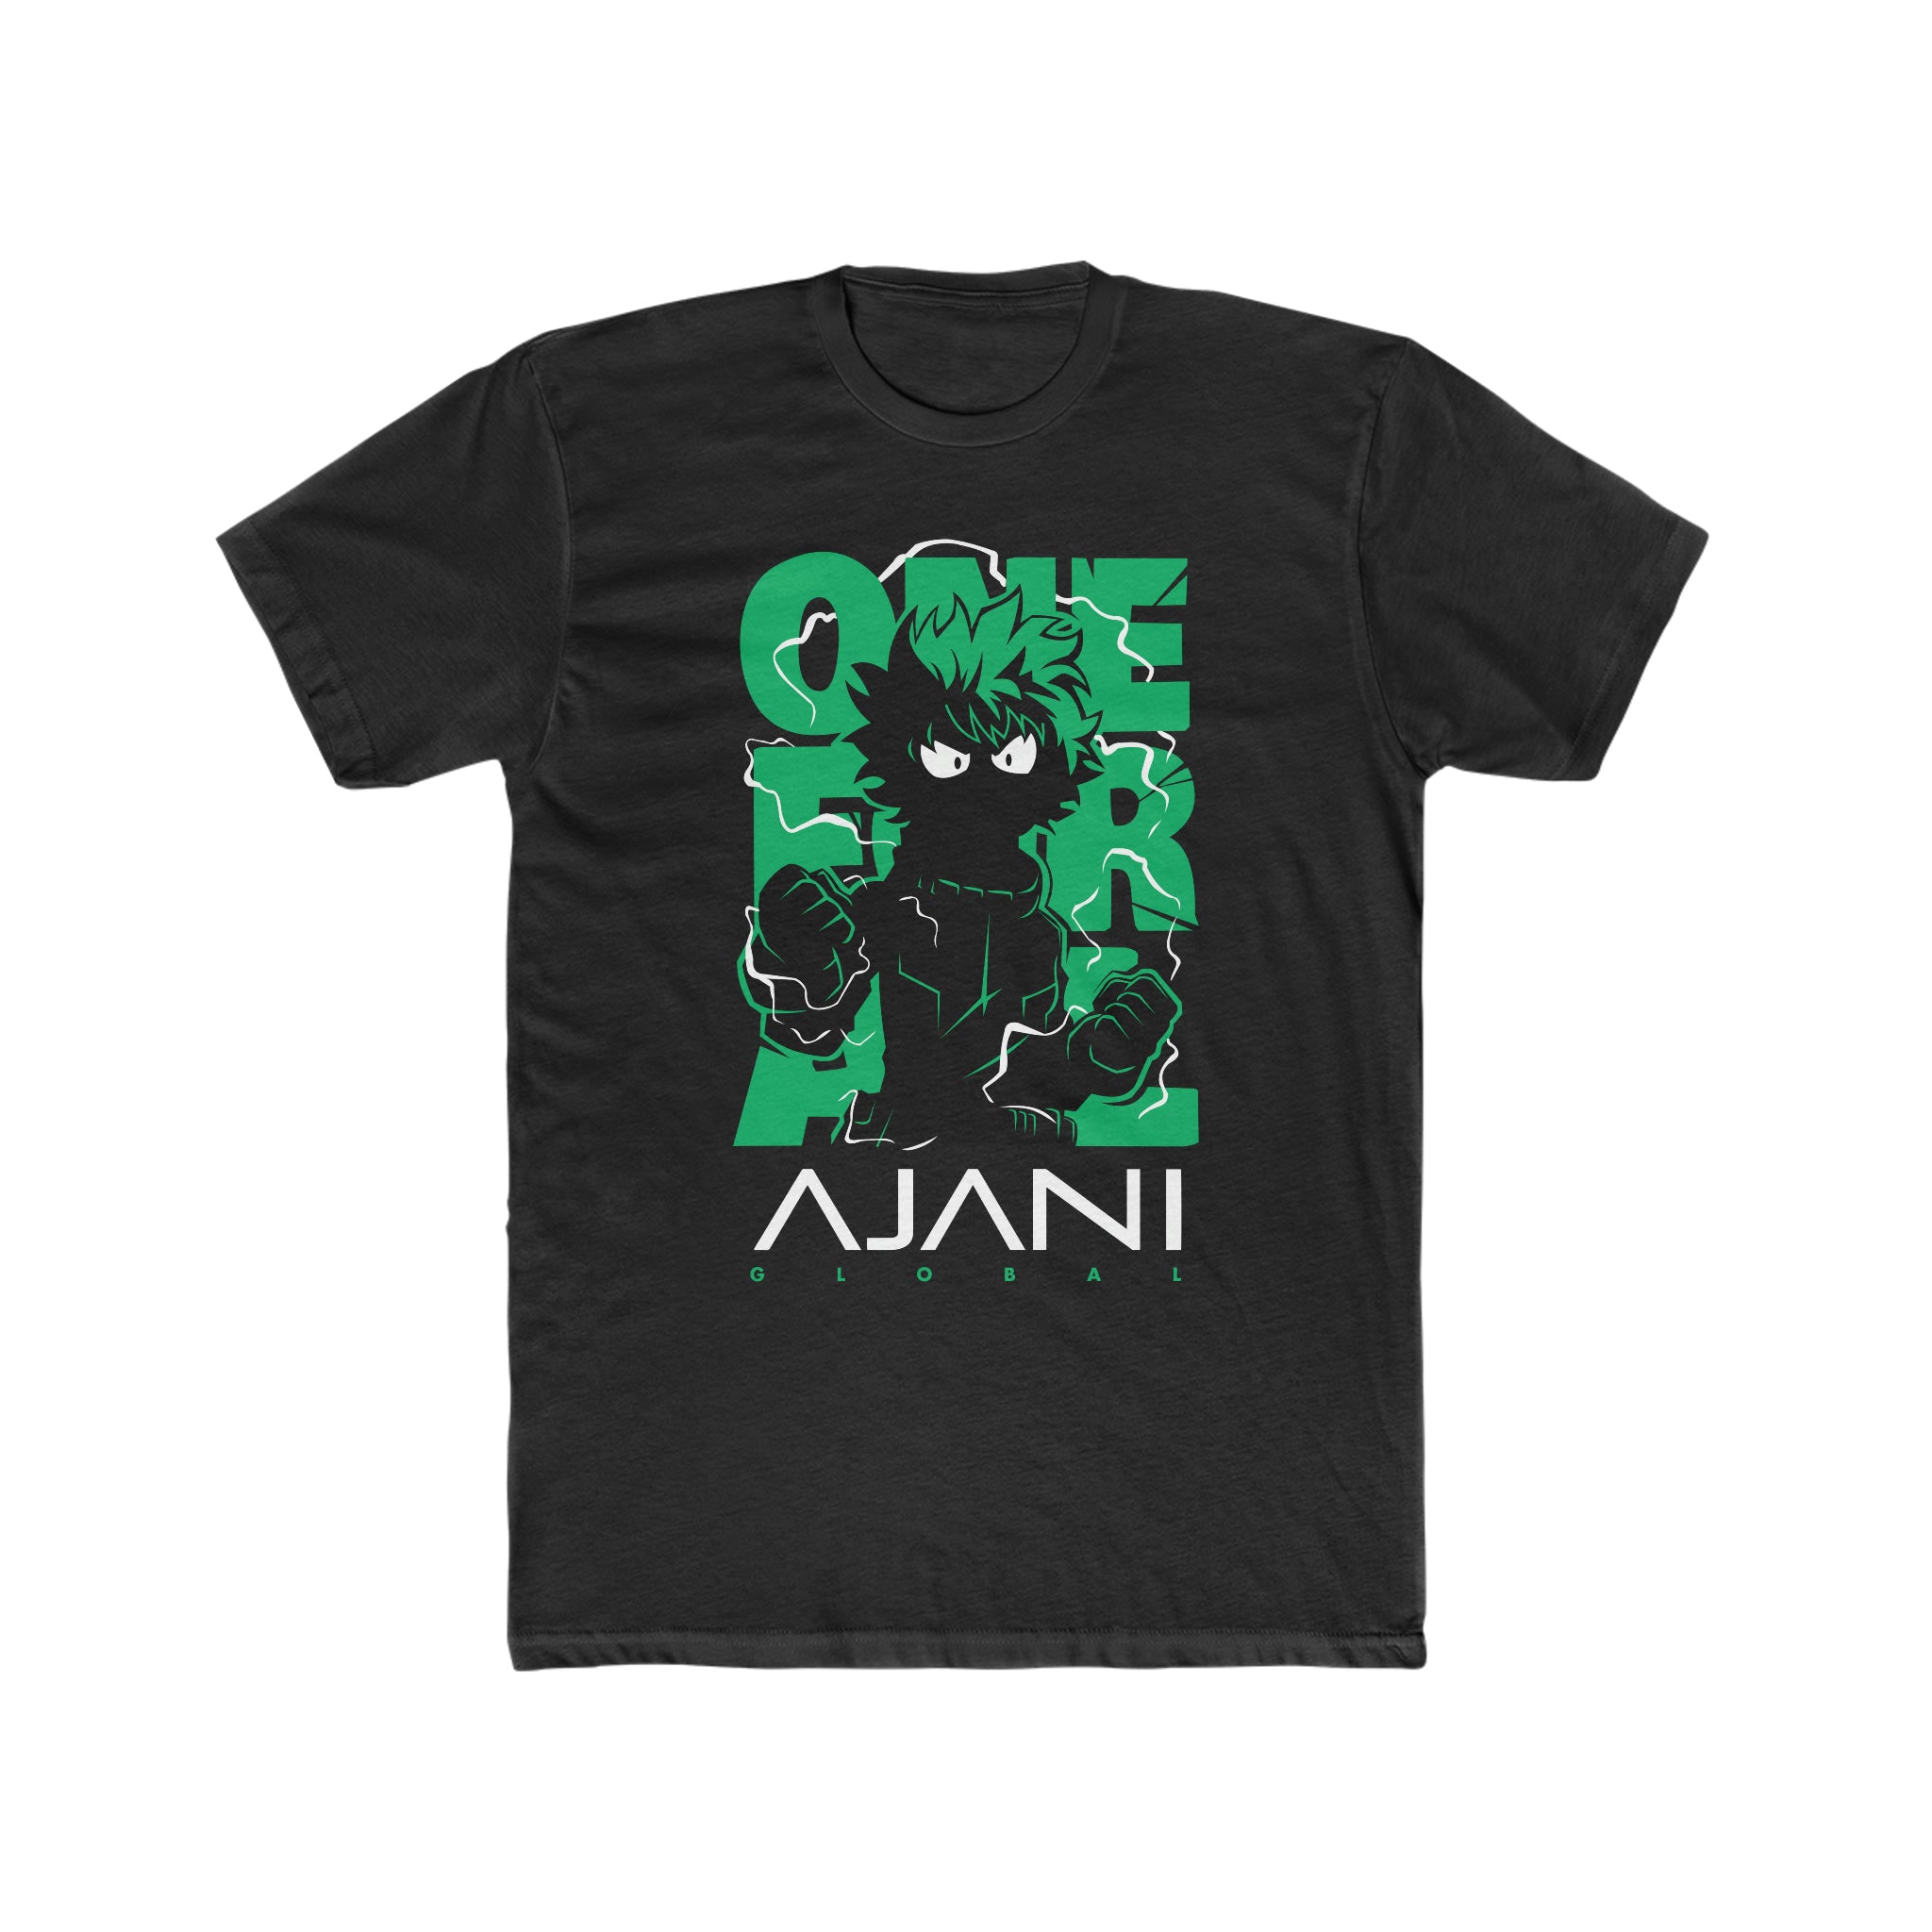 One For All Crew Tee